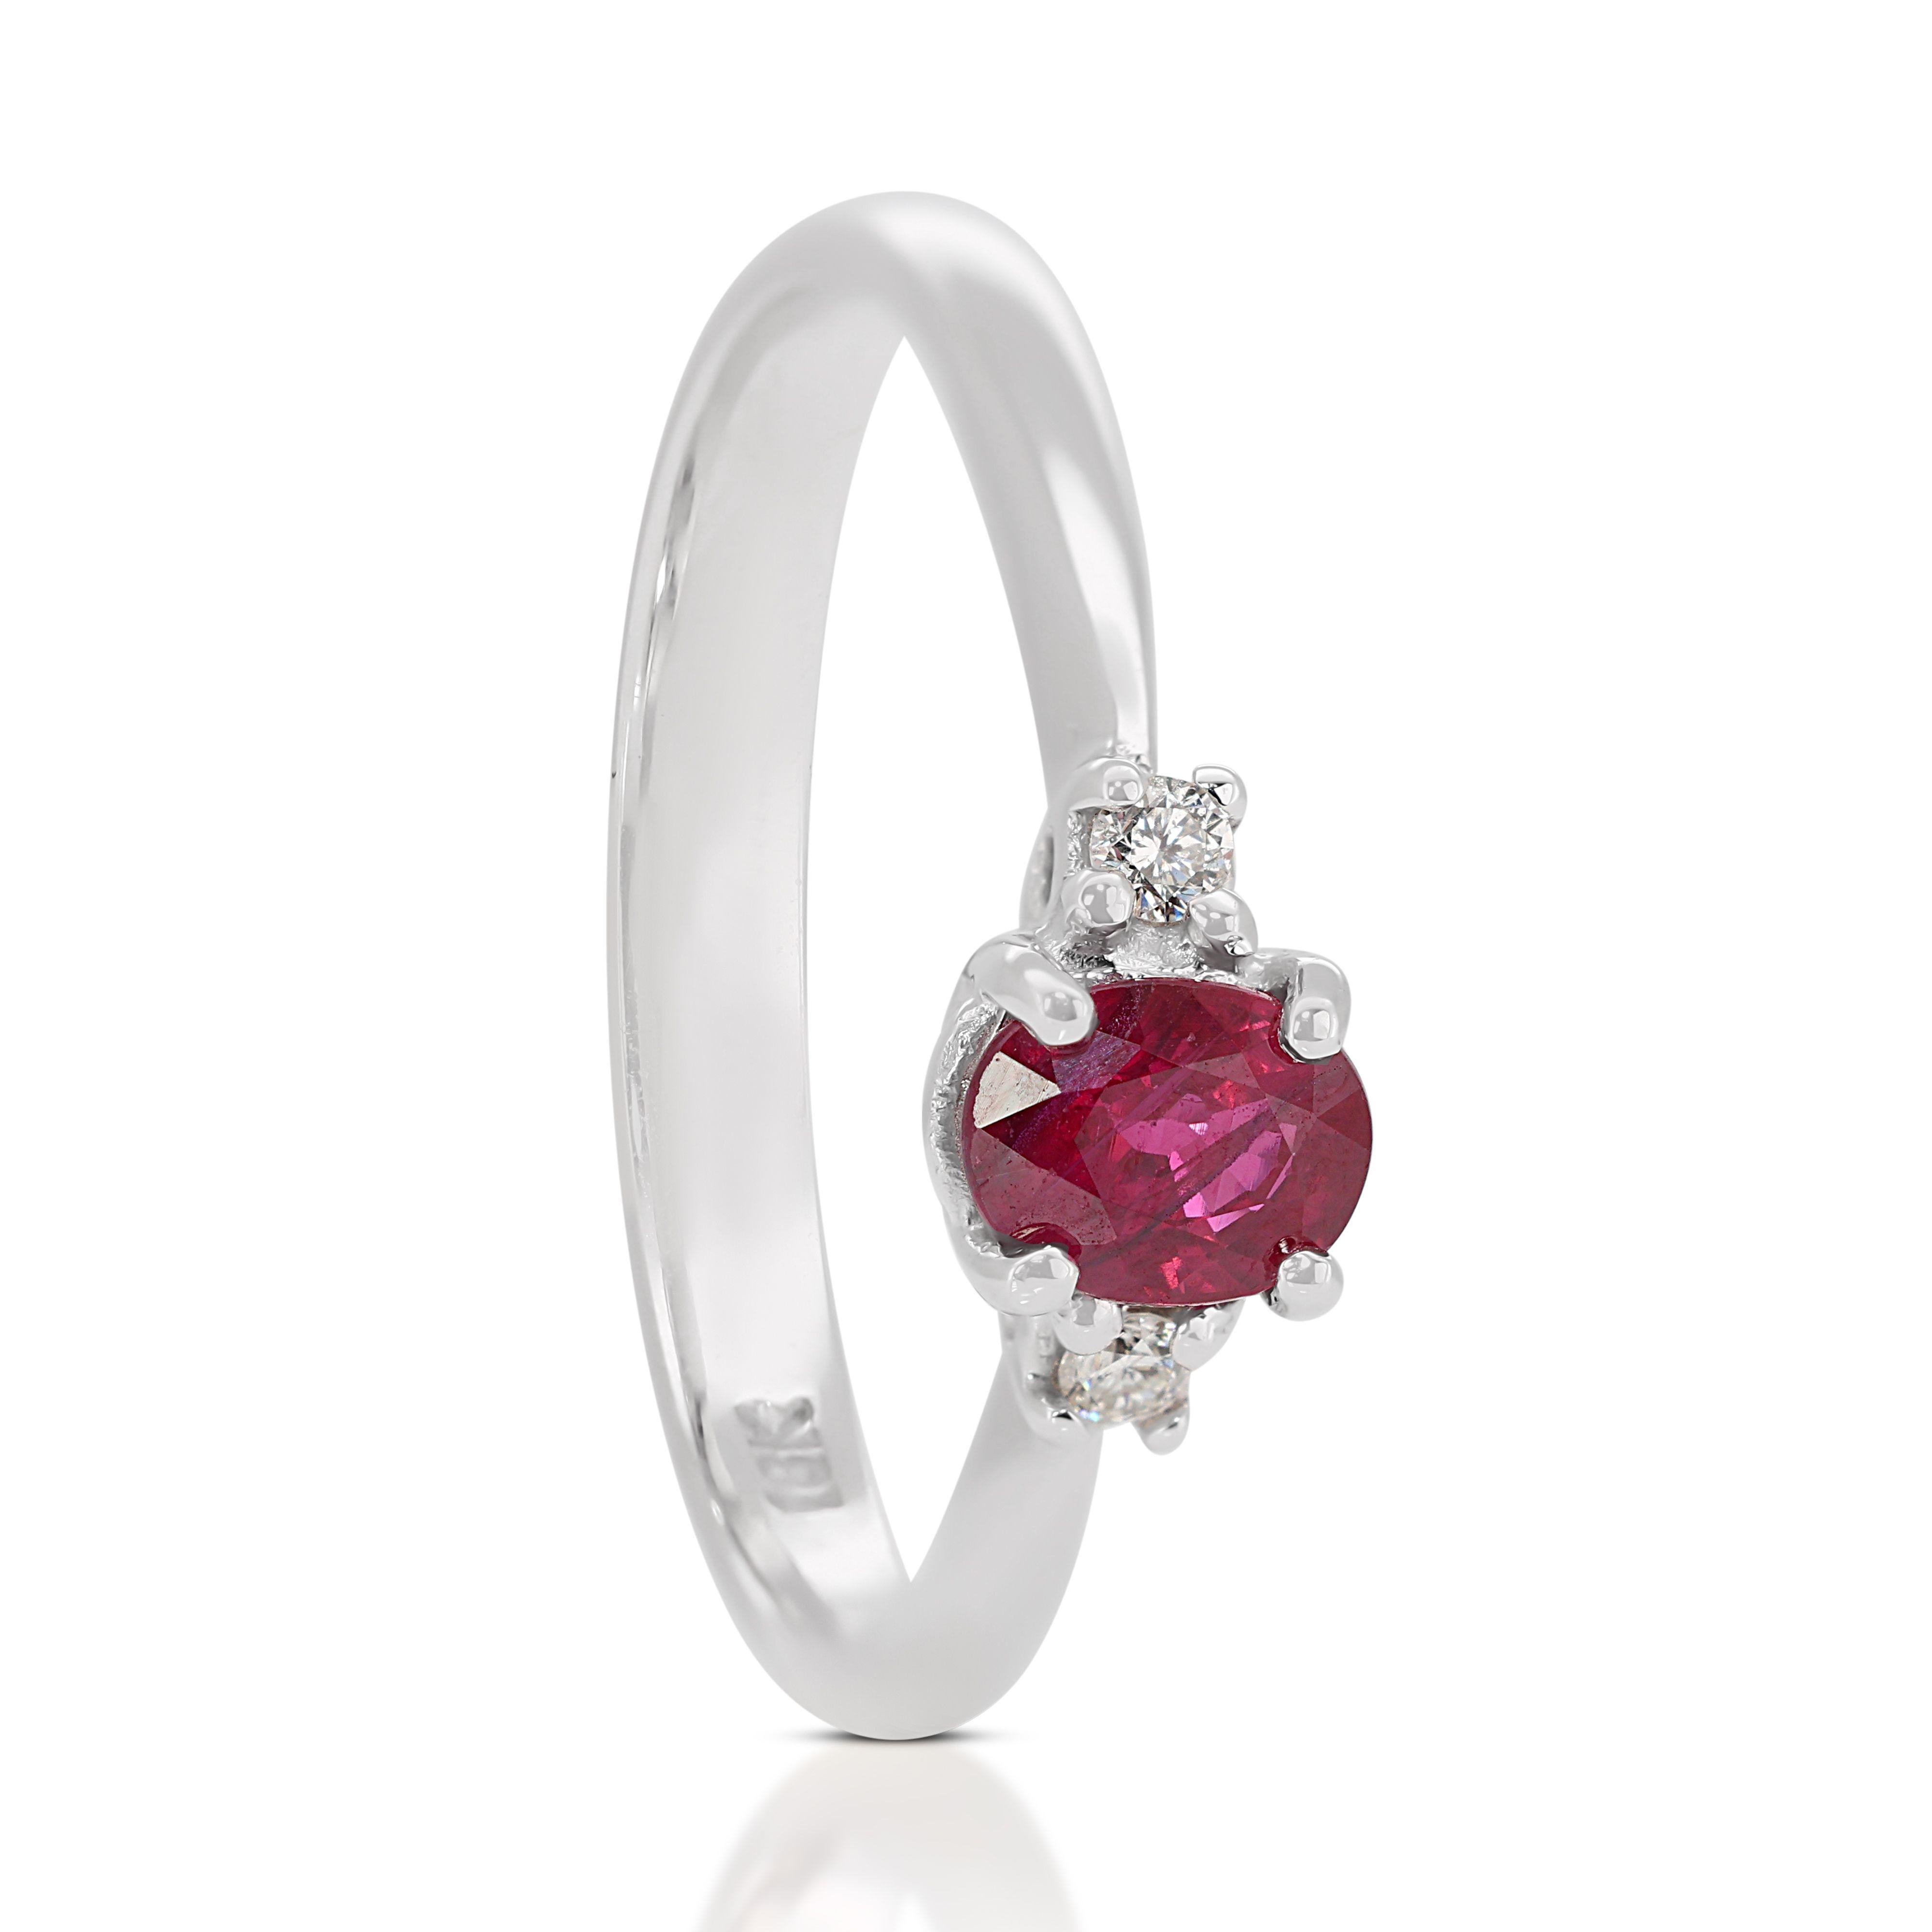 Dazzling 18k White Gold 3 Stone Ring 0.34ct Natural Ruby and Diamonds NGI Cert For Sale 2